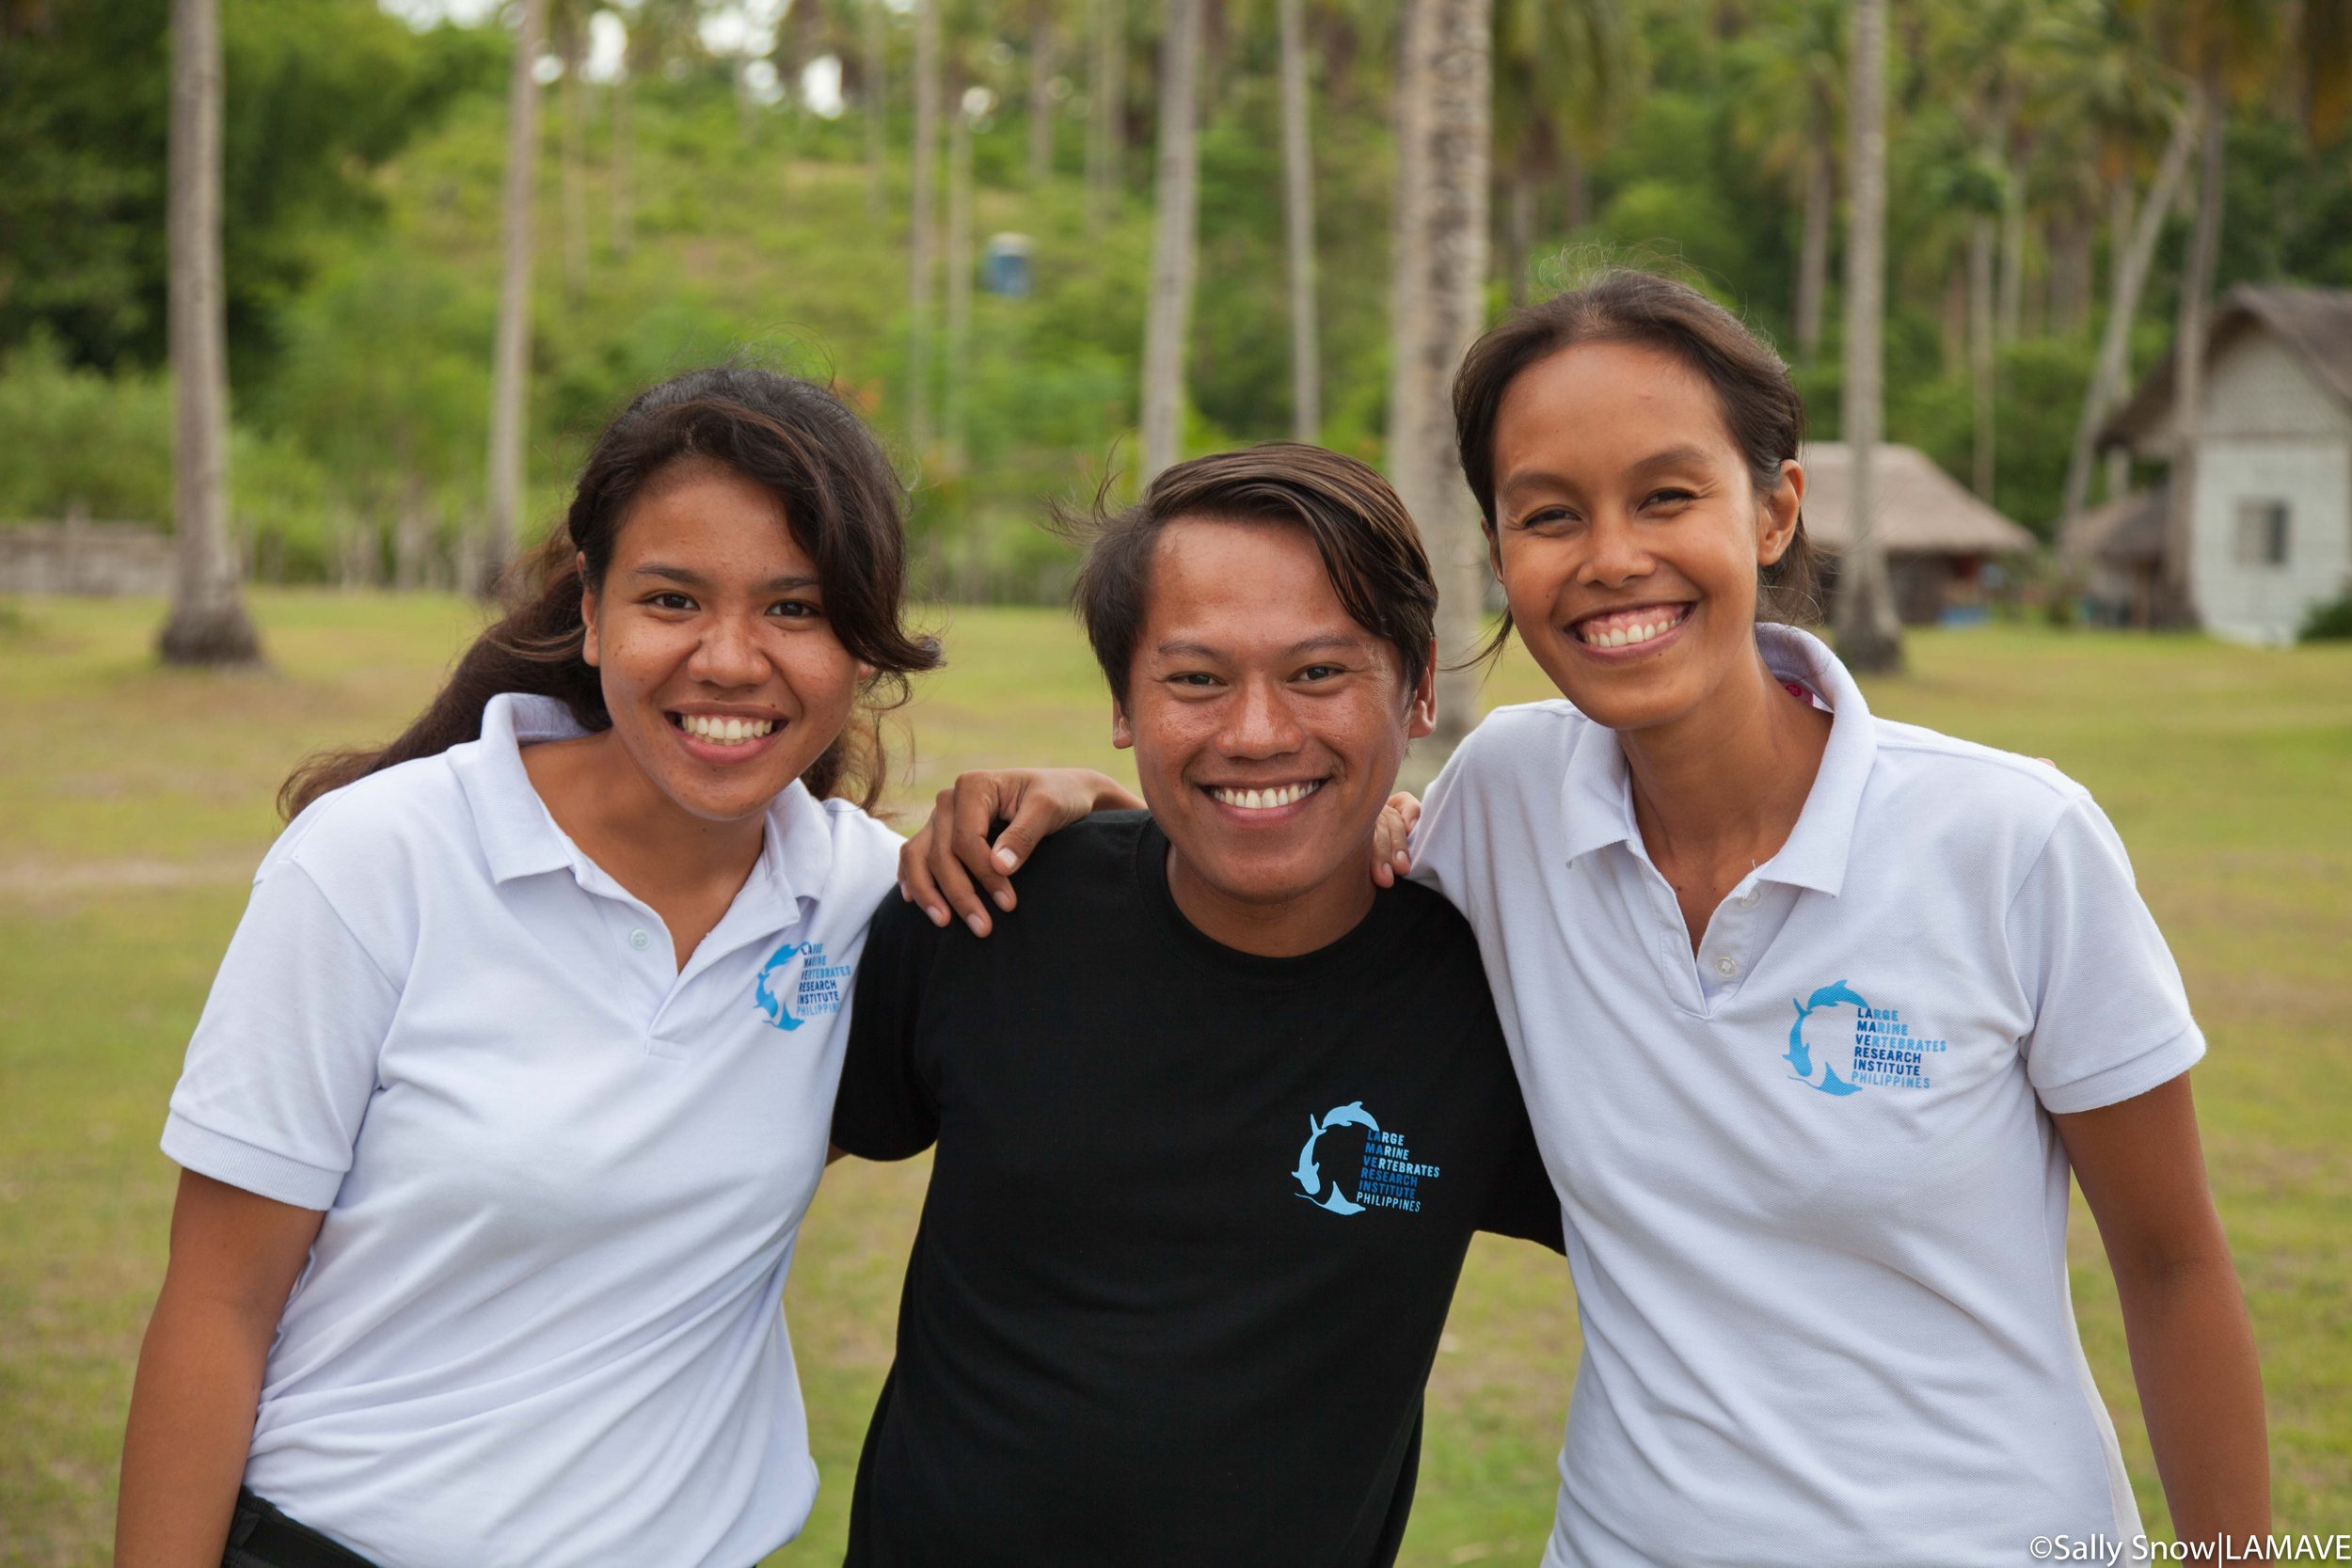  Sue (left) with Jemar and Jess, the Rapid bycatch Assessment team in 2019.  